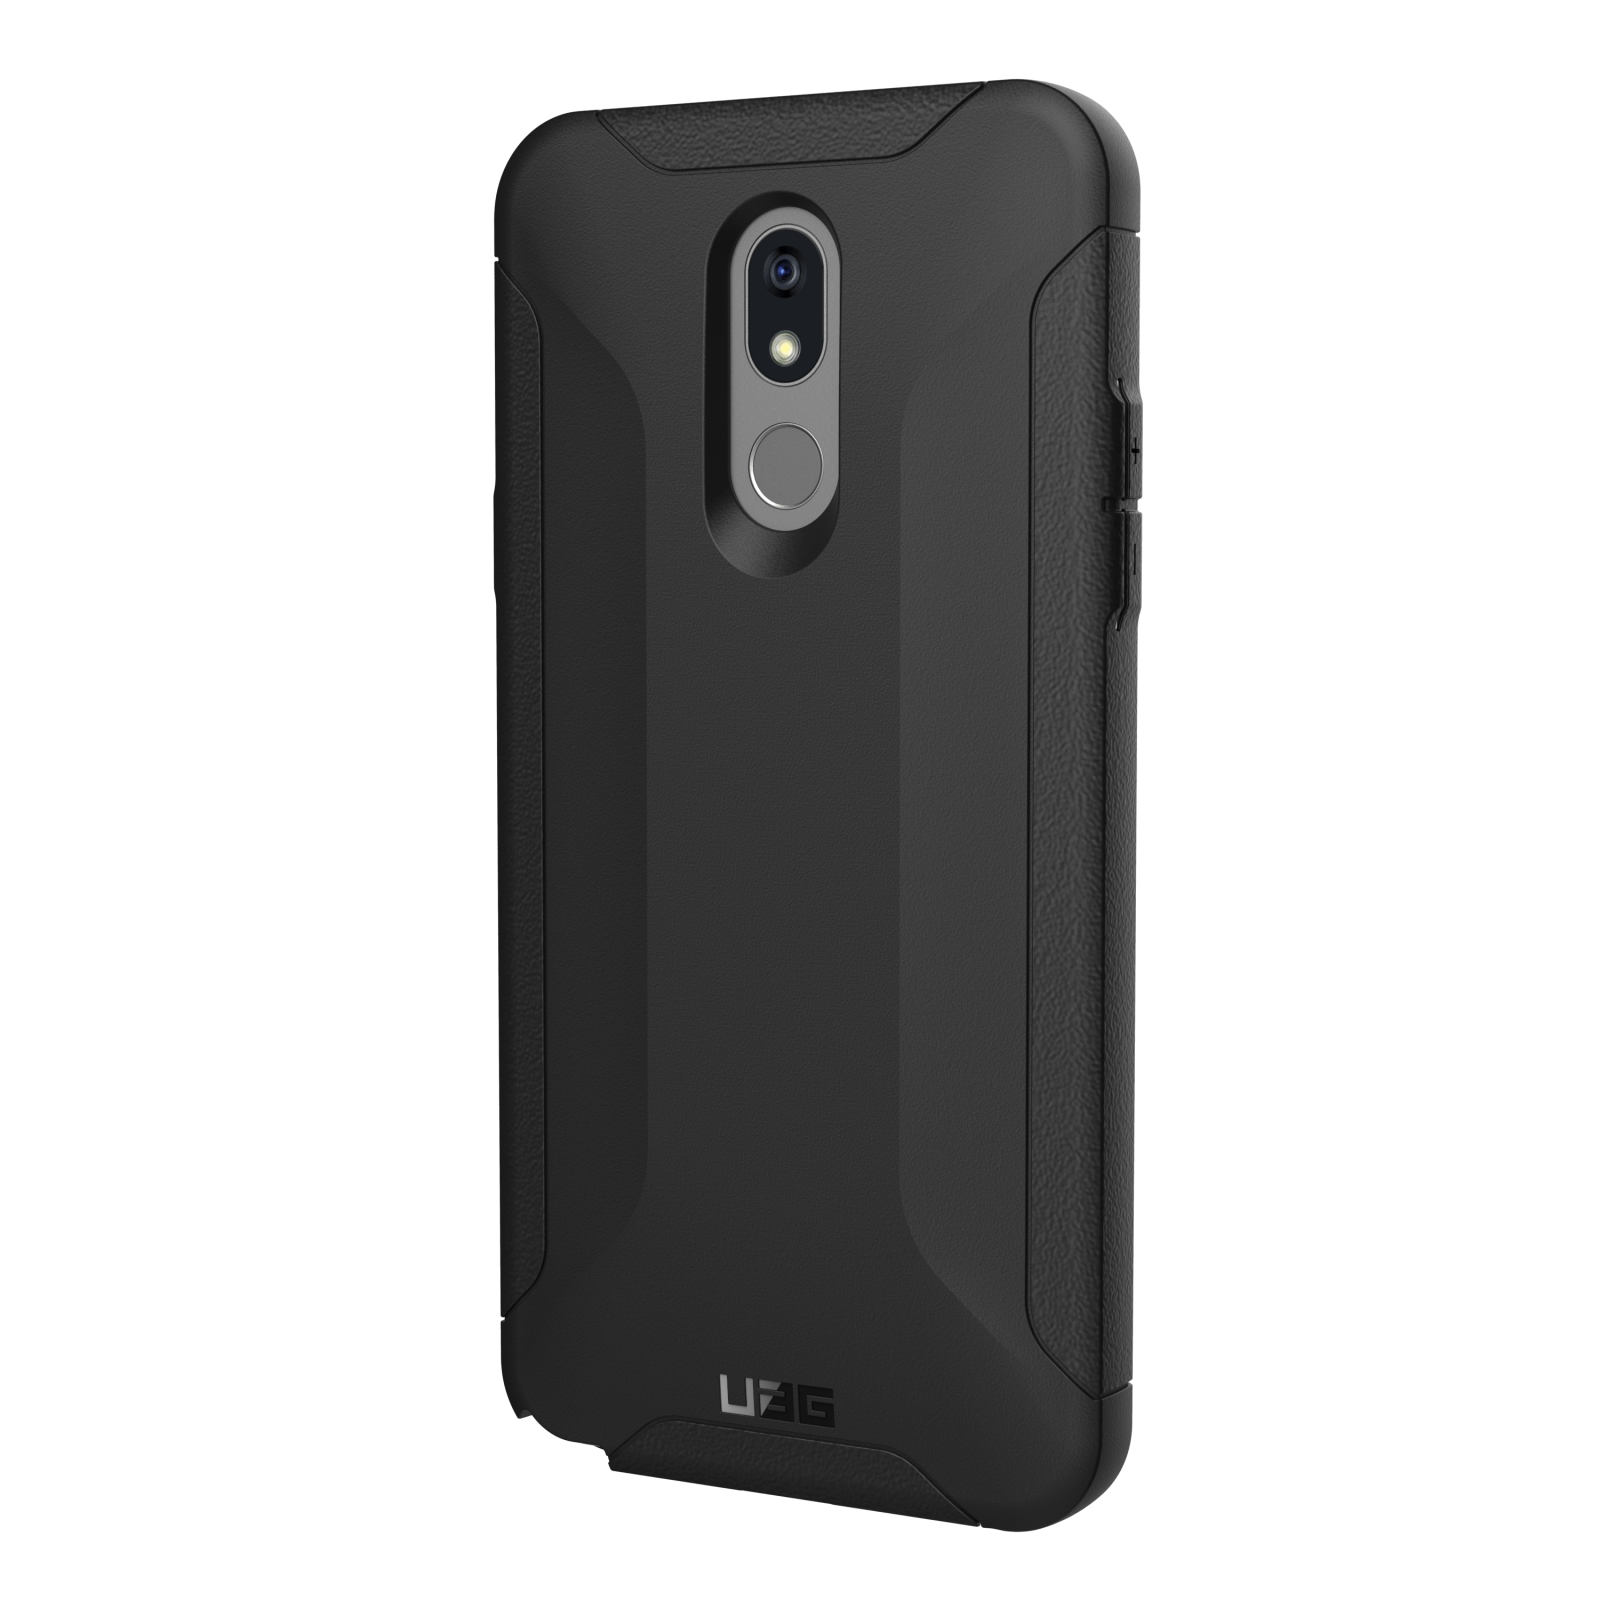 Protective Slim Stylish Case For The Lg Stylo 5 Rugged Cases By Uag Urban Armor Gear